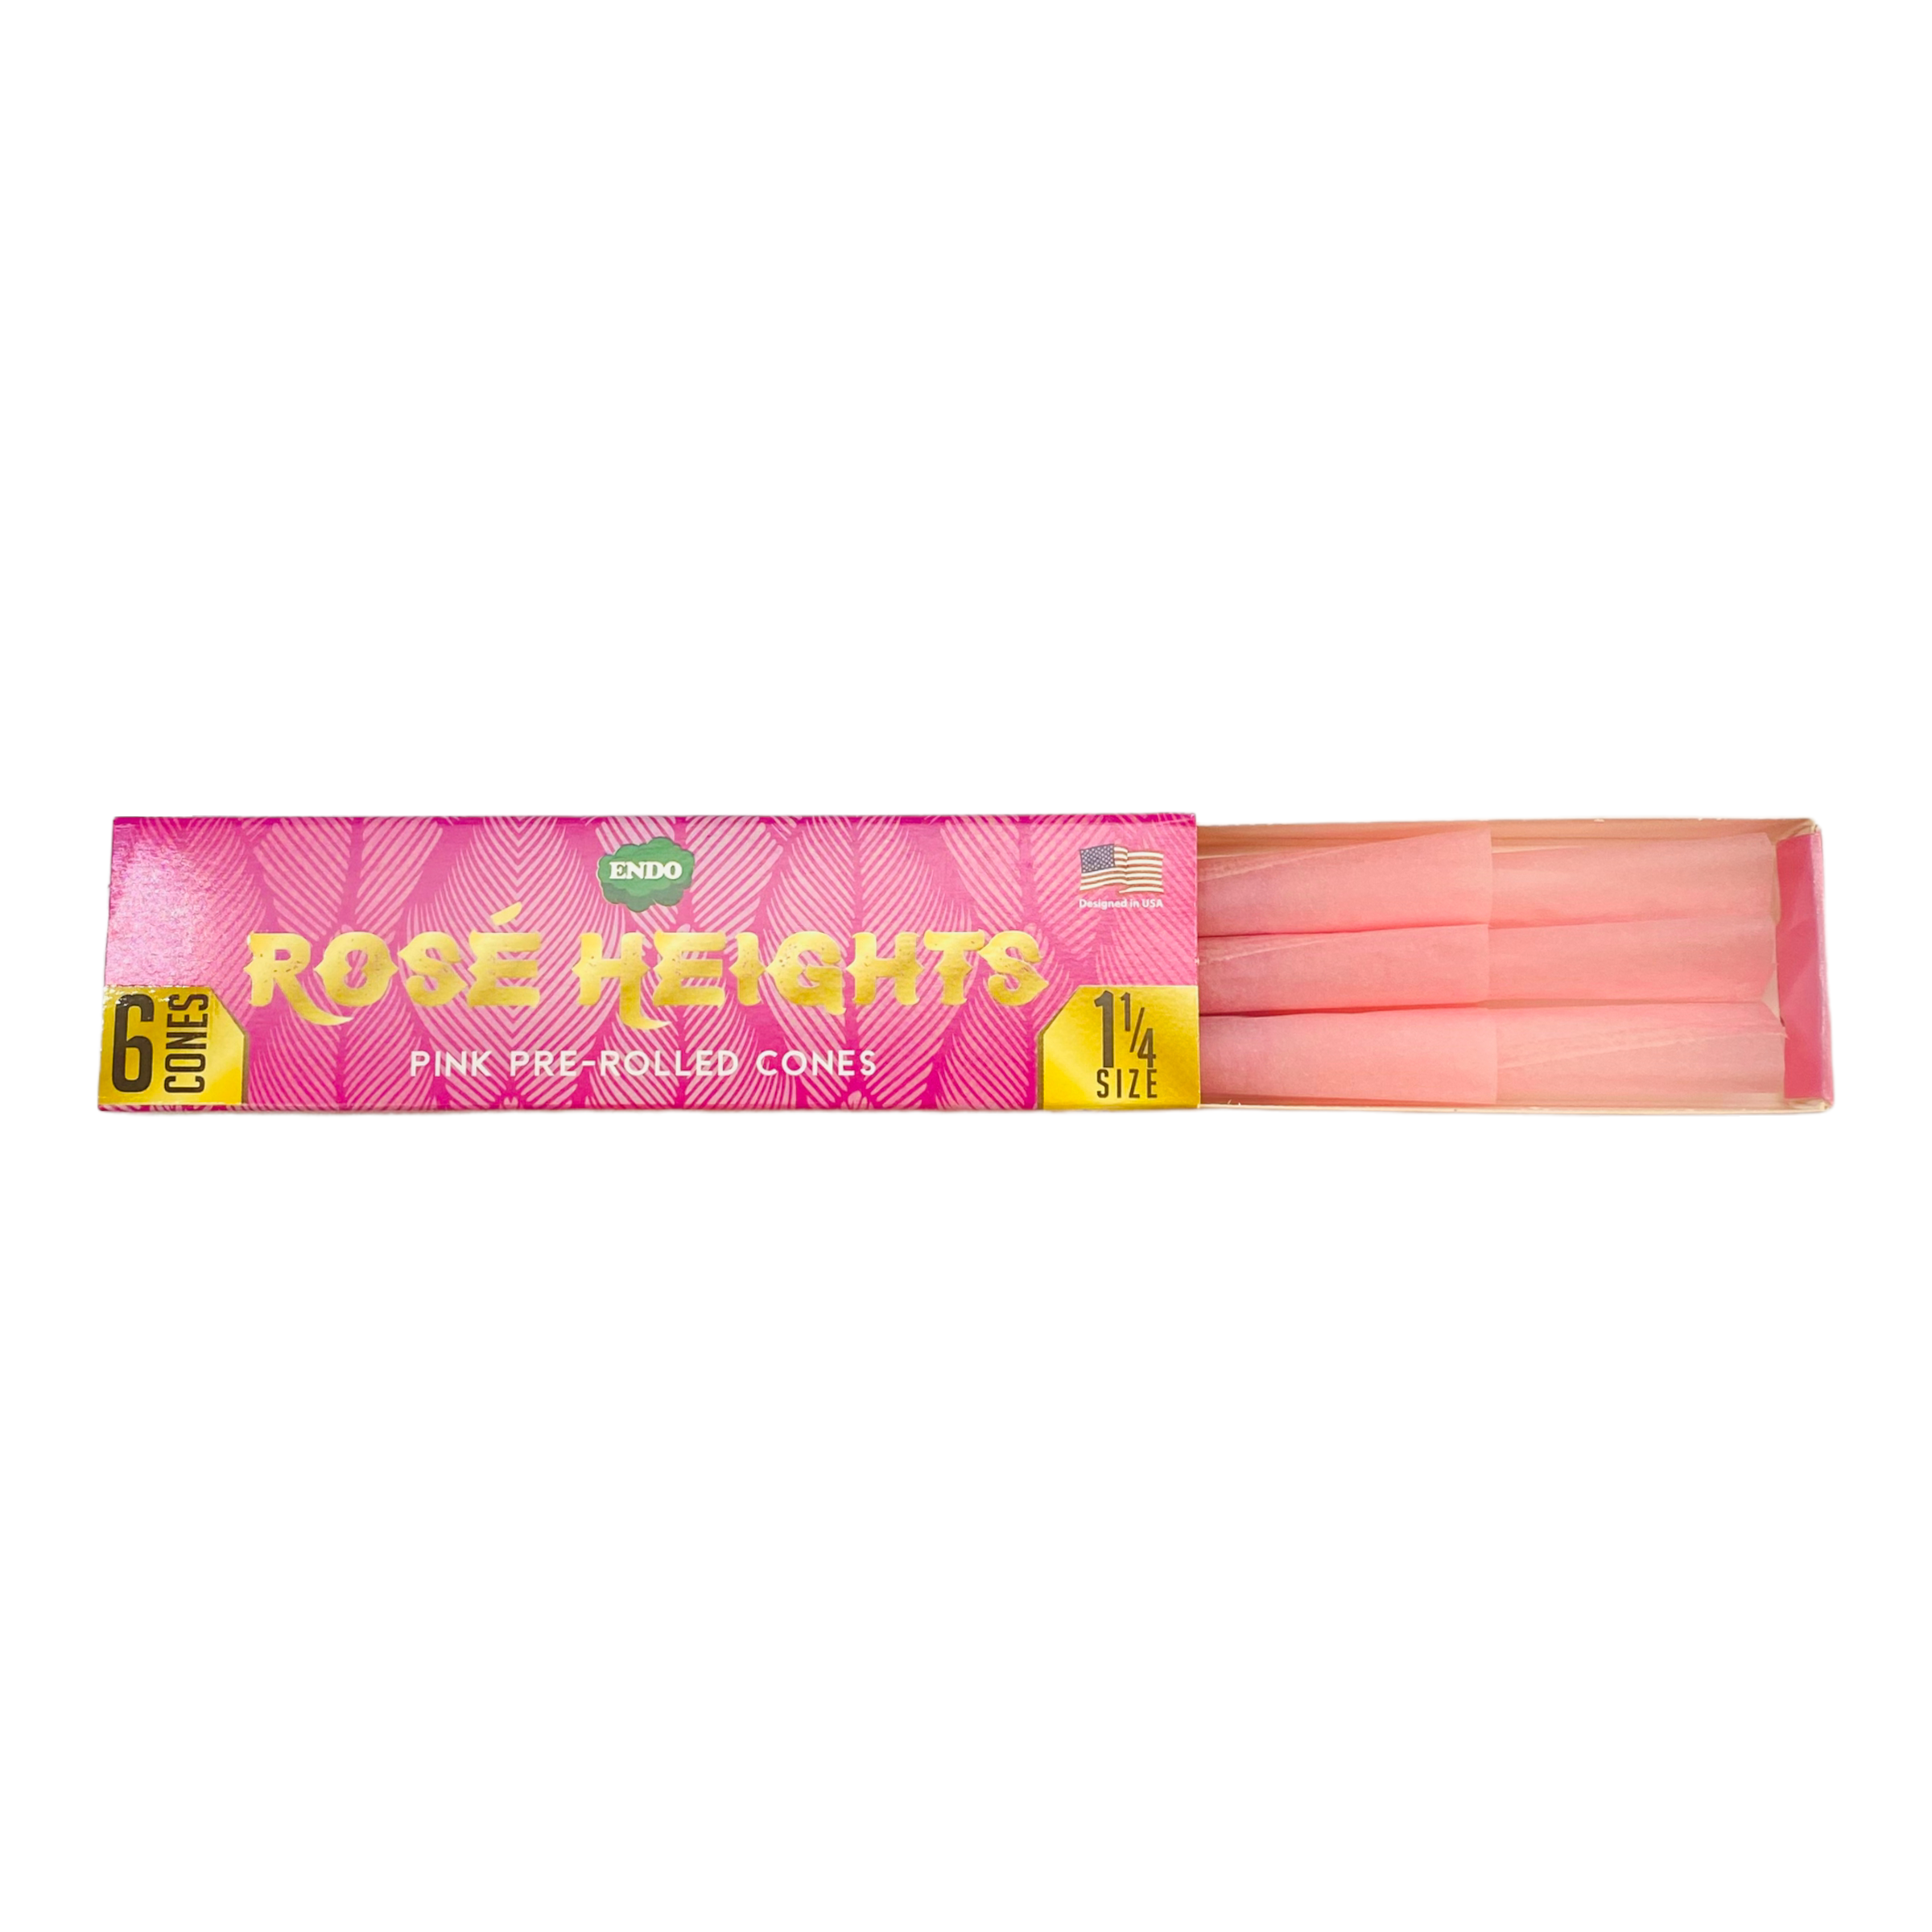 Rose Heights - Pink Pre Rolled Cones - 1 1/4 Size - 6ct - 2 BOXES